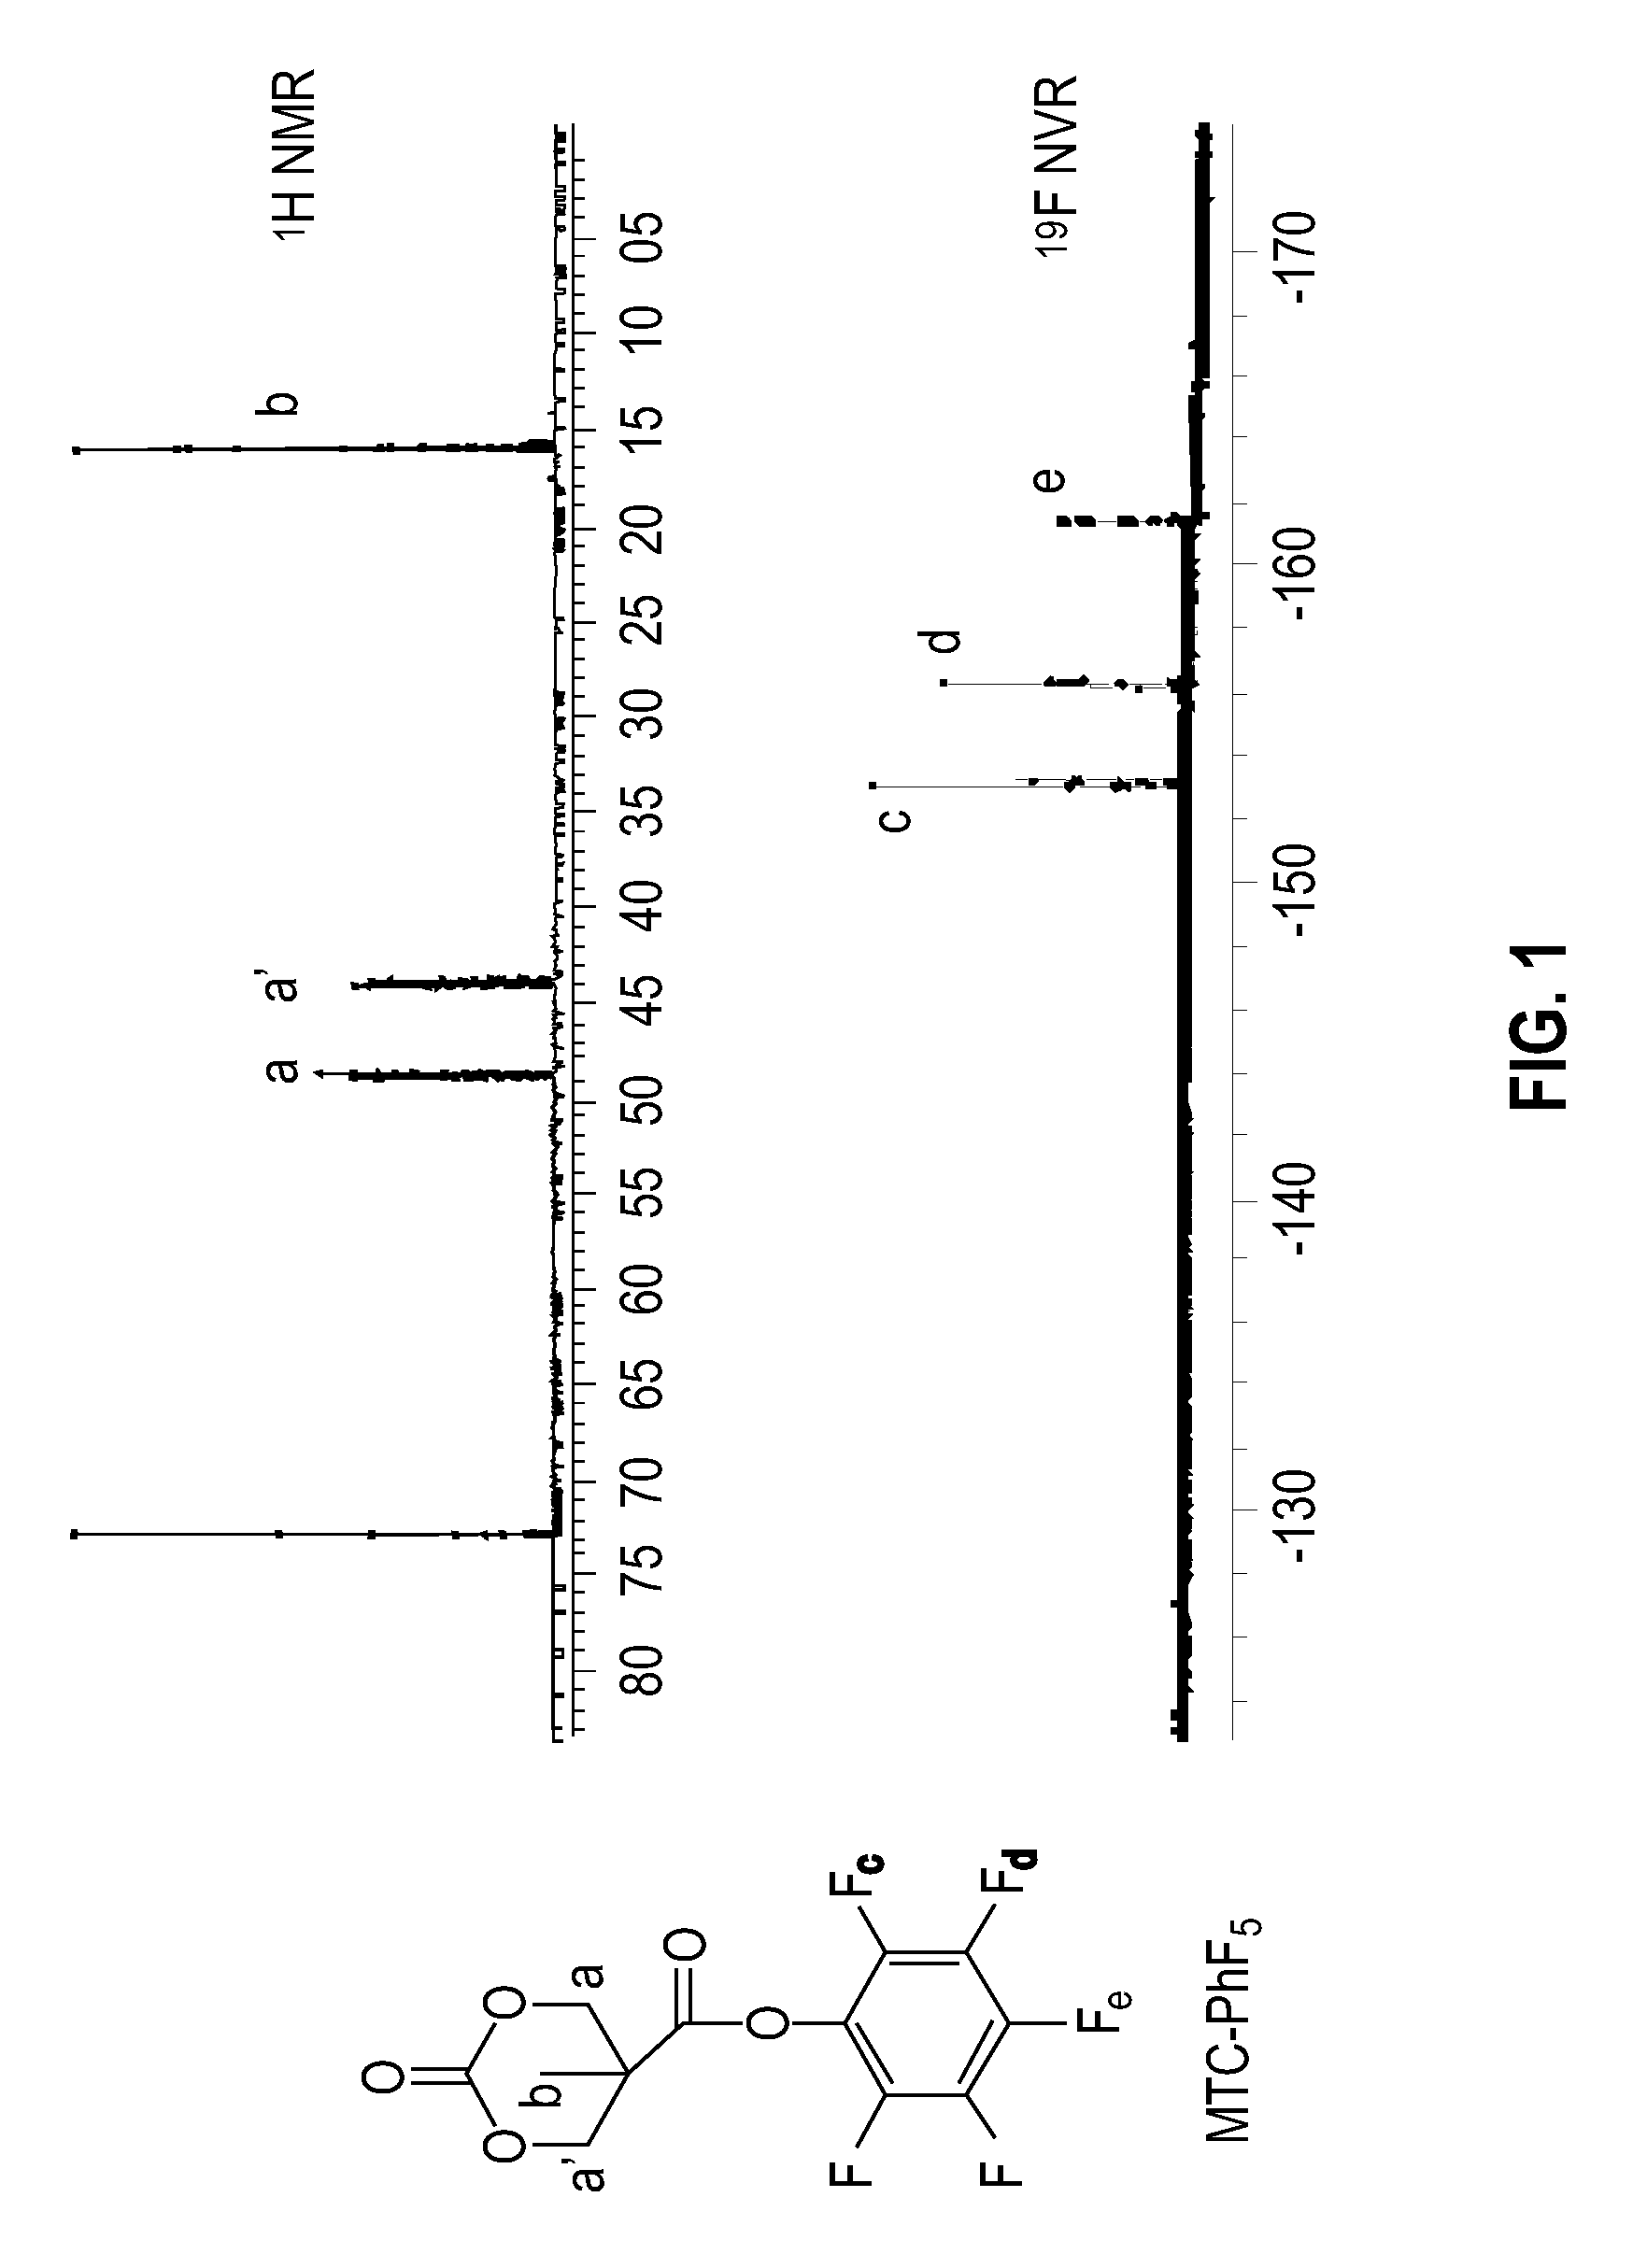 Polymers bearing pendant pentafluorophenyl ester groups, and methods of synthesis and functionalization thereof